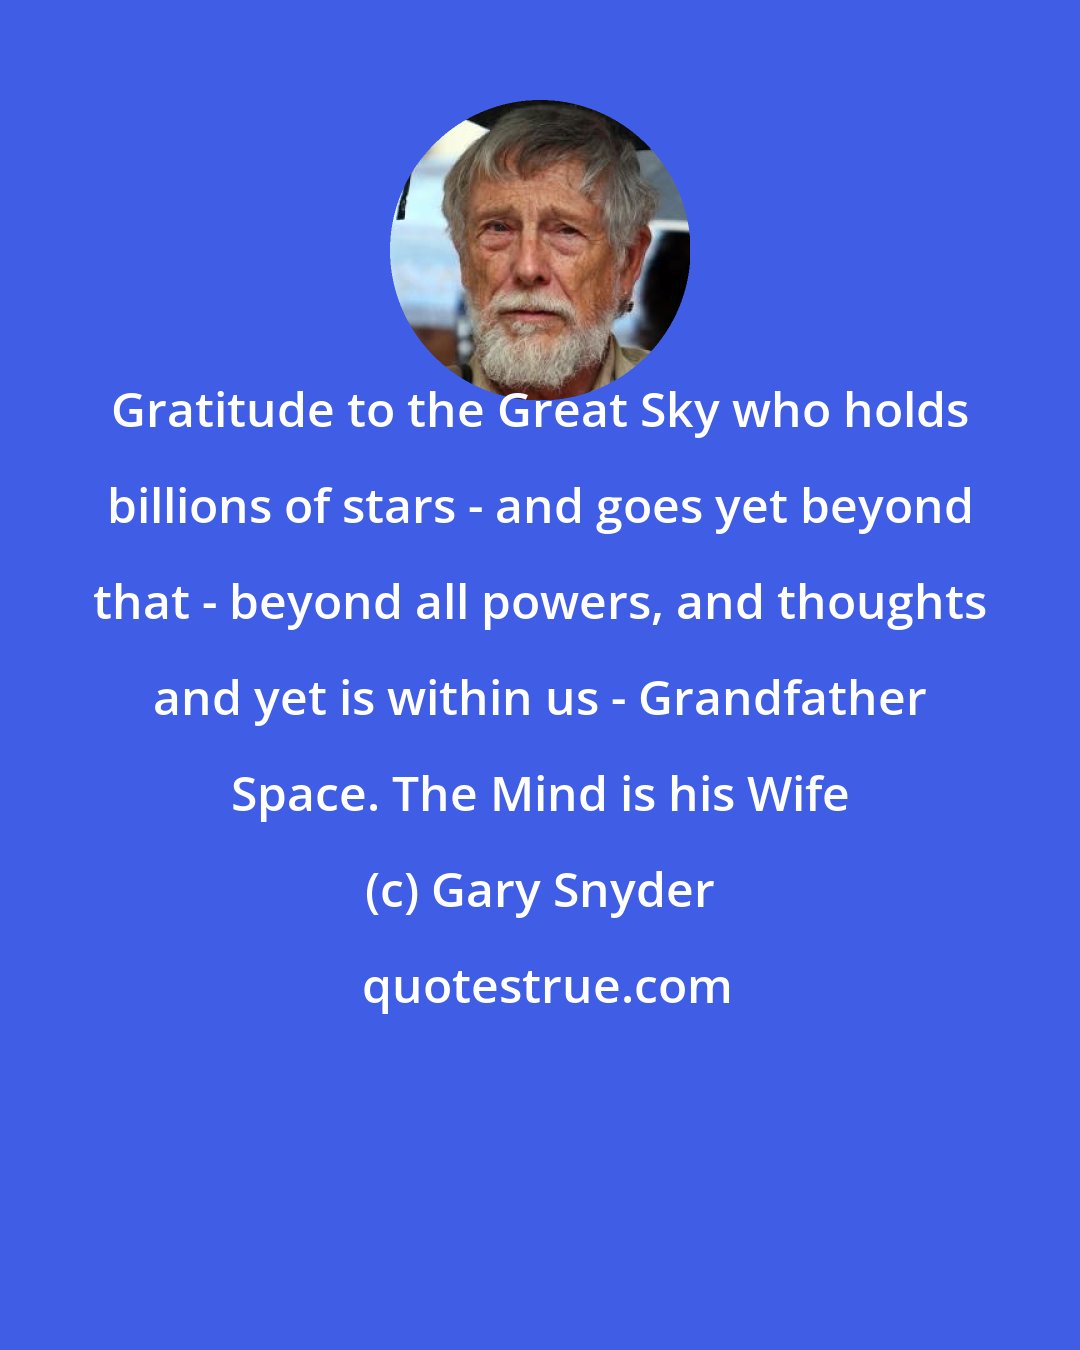 Gary Snyder: Gratitude to the Great Sky who holds billions of stars - and goes yet beyond that - beyond all powers, and thoughts and yet is within us - Grandfather Space. The Mind is his Wife